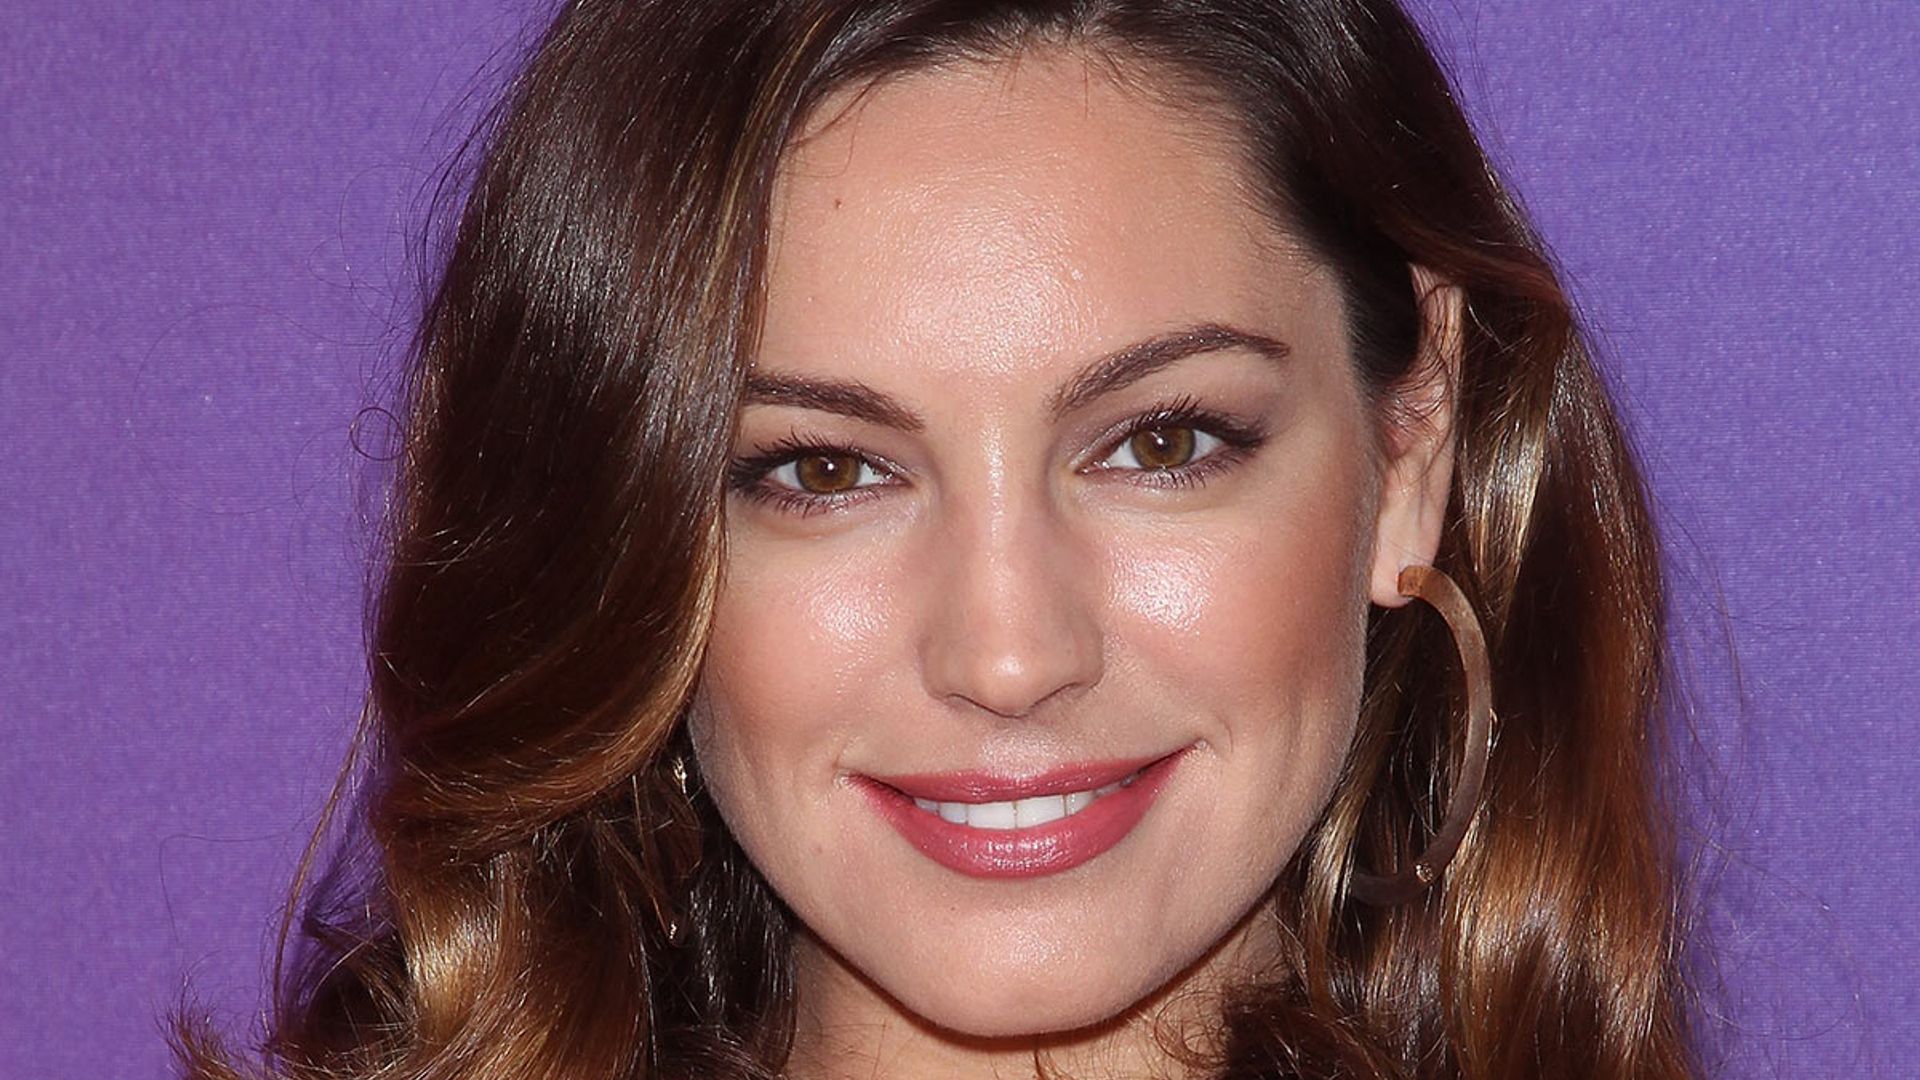 Kelly Brook turns heads in £16 Tesco shorts and blazer outfit